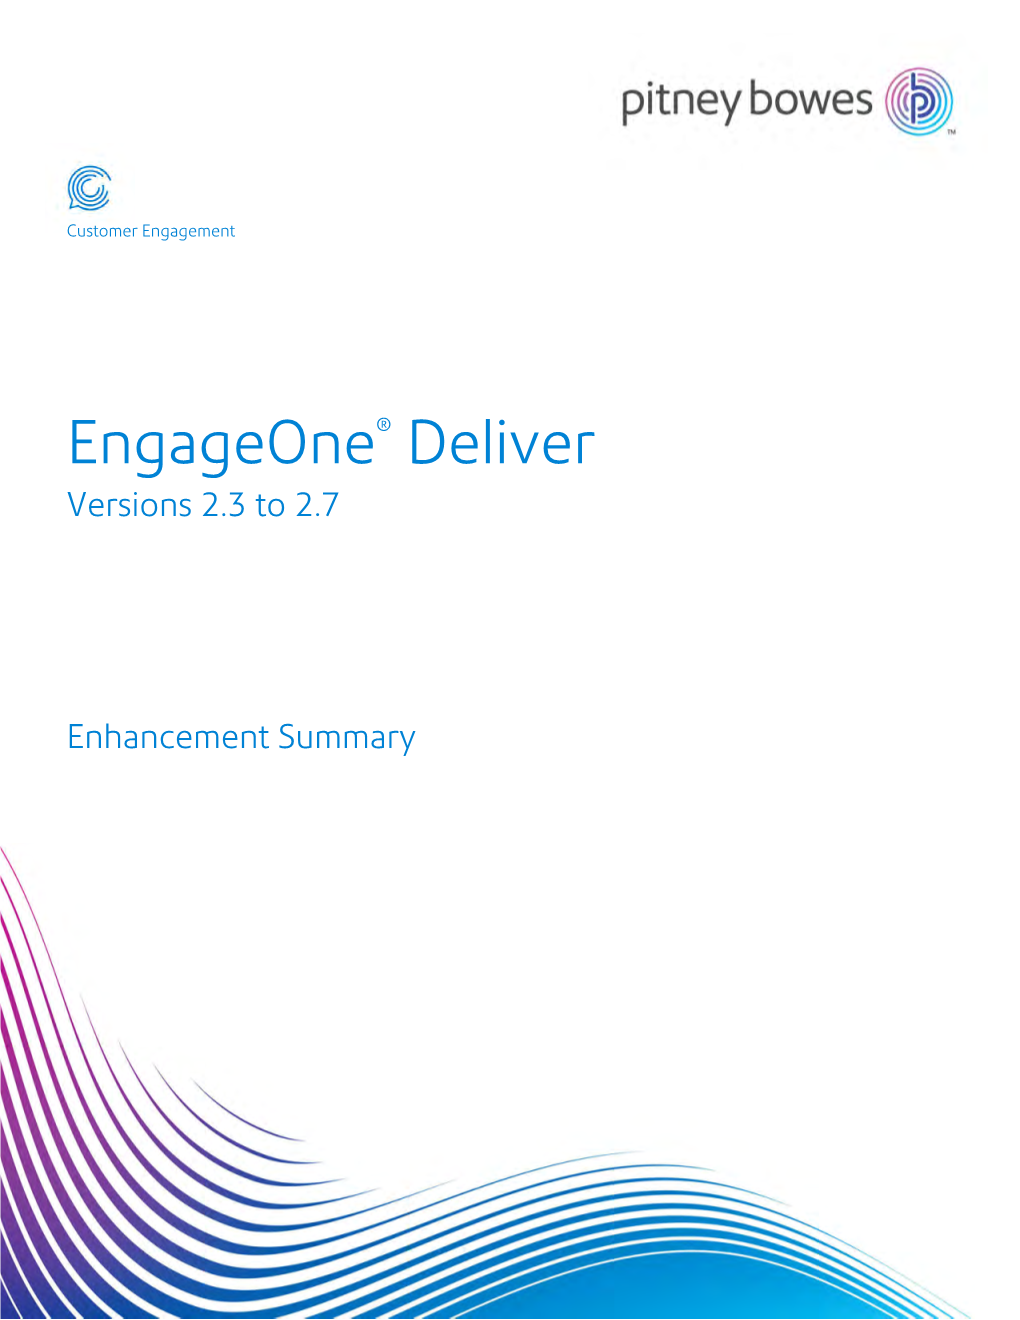 Engageone Deliver V2.7.0 Release Summary